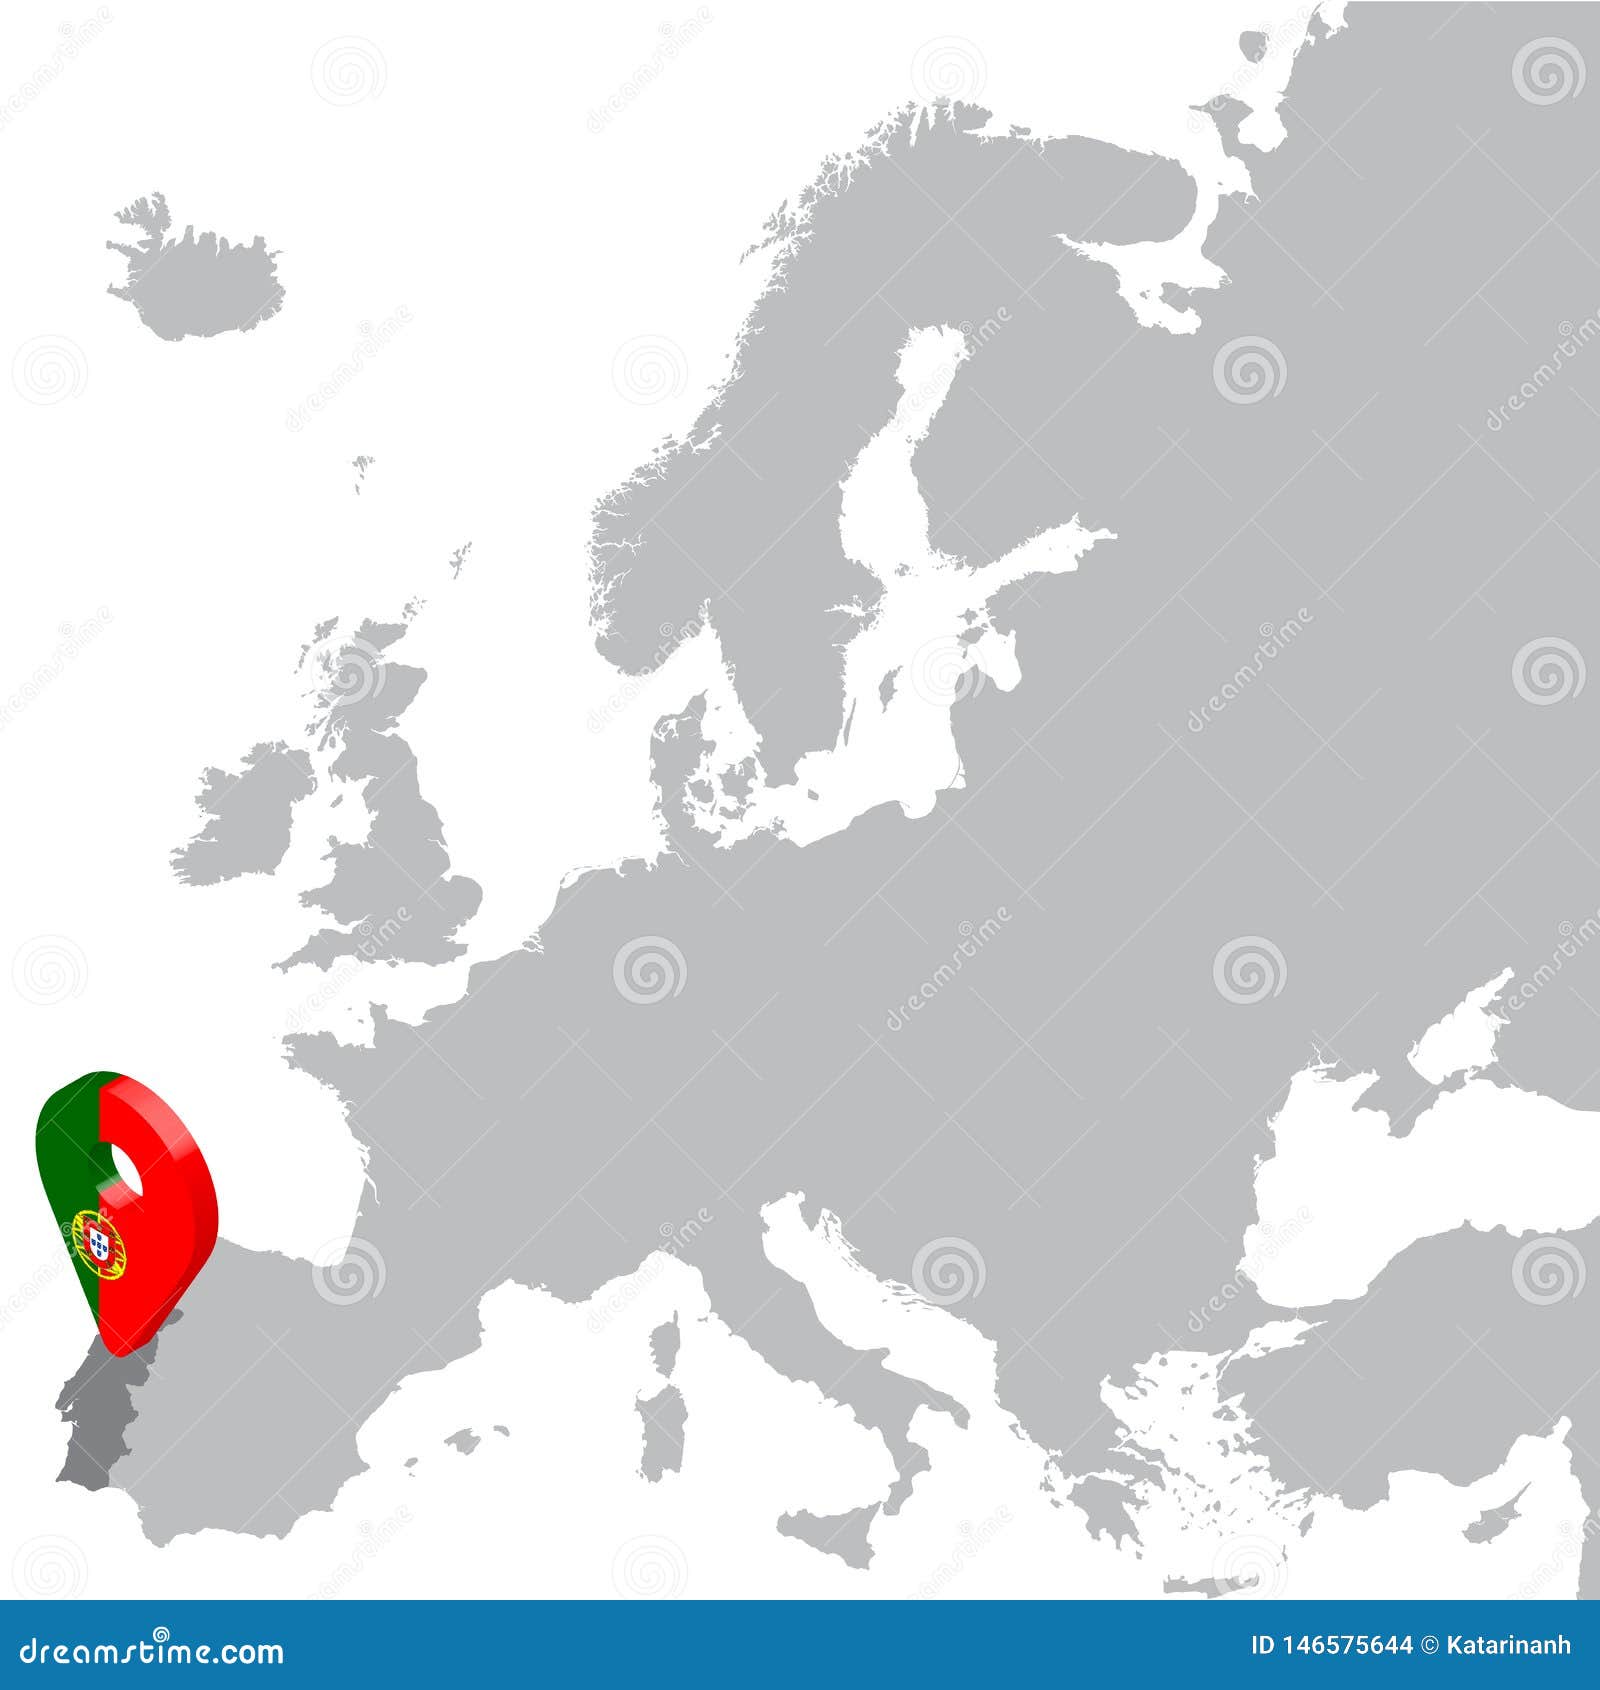 Portugal Map on a World Map with Flag and Map Pointer. Vector